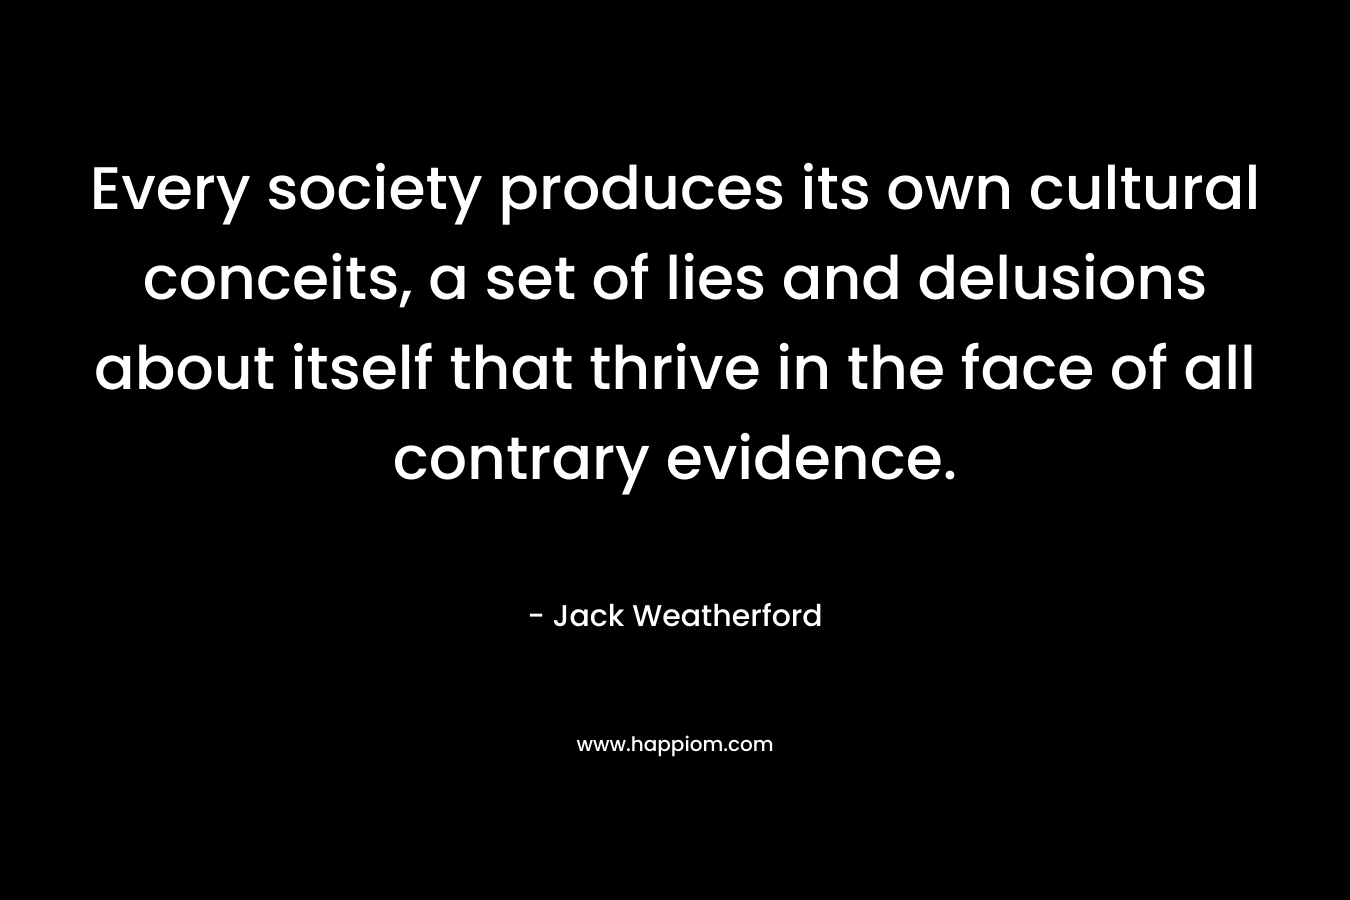 Every society produces its own cultural conceits, a set of lies and delusions about itself that thrive in the face of all contrary evidence.